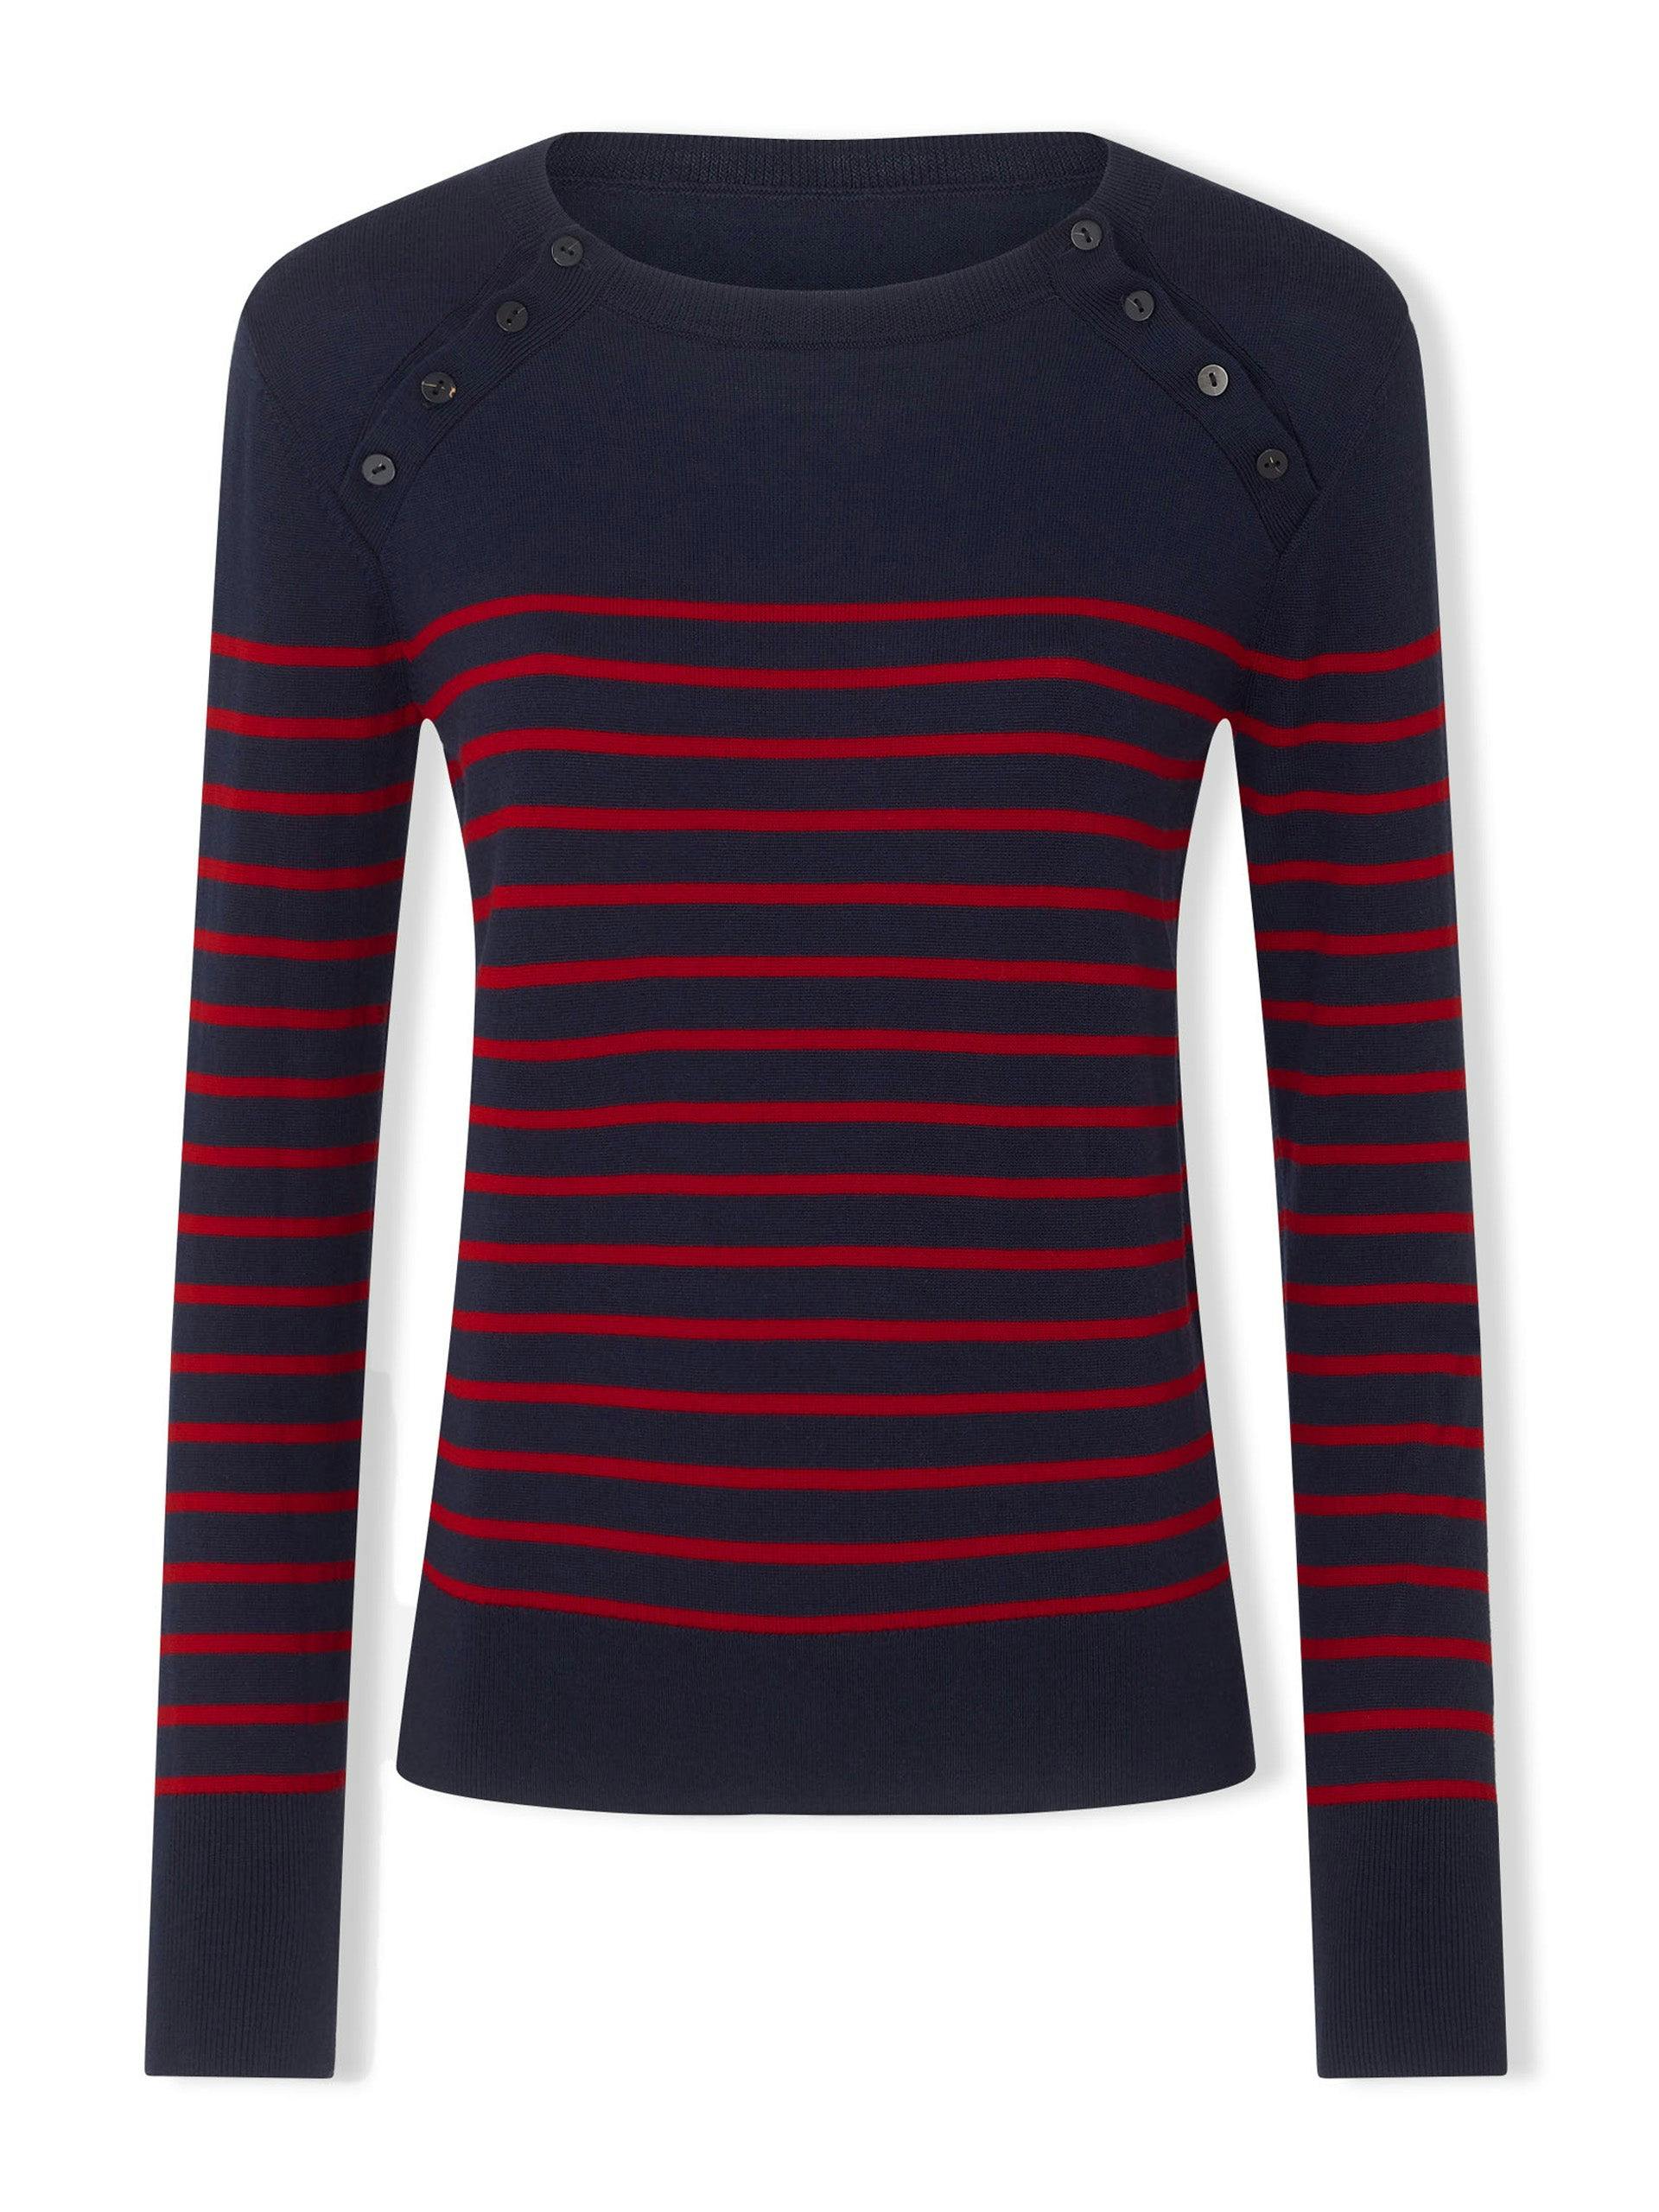 Navy and red stripe Hailey jumper